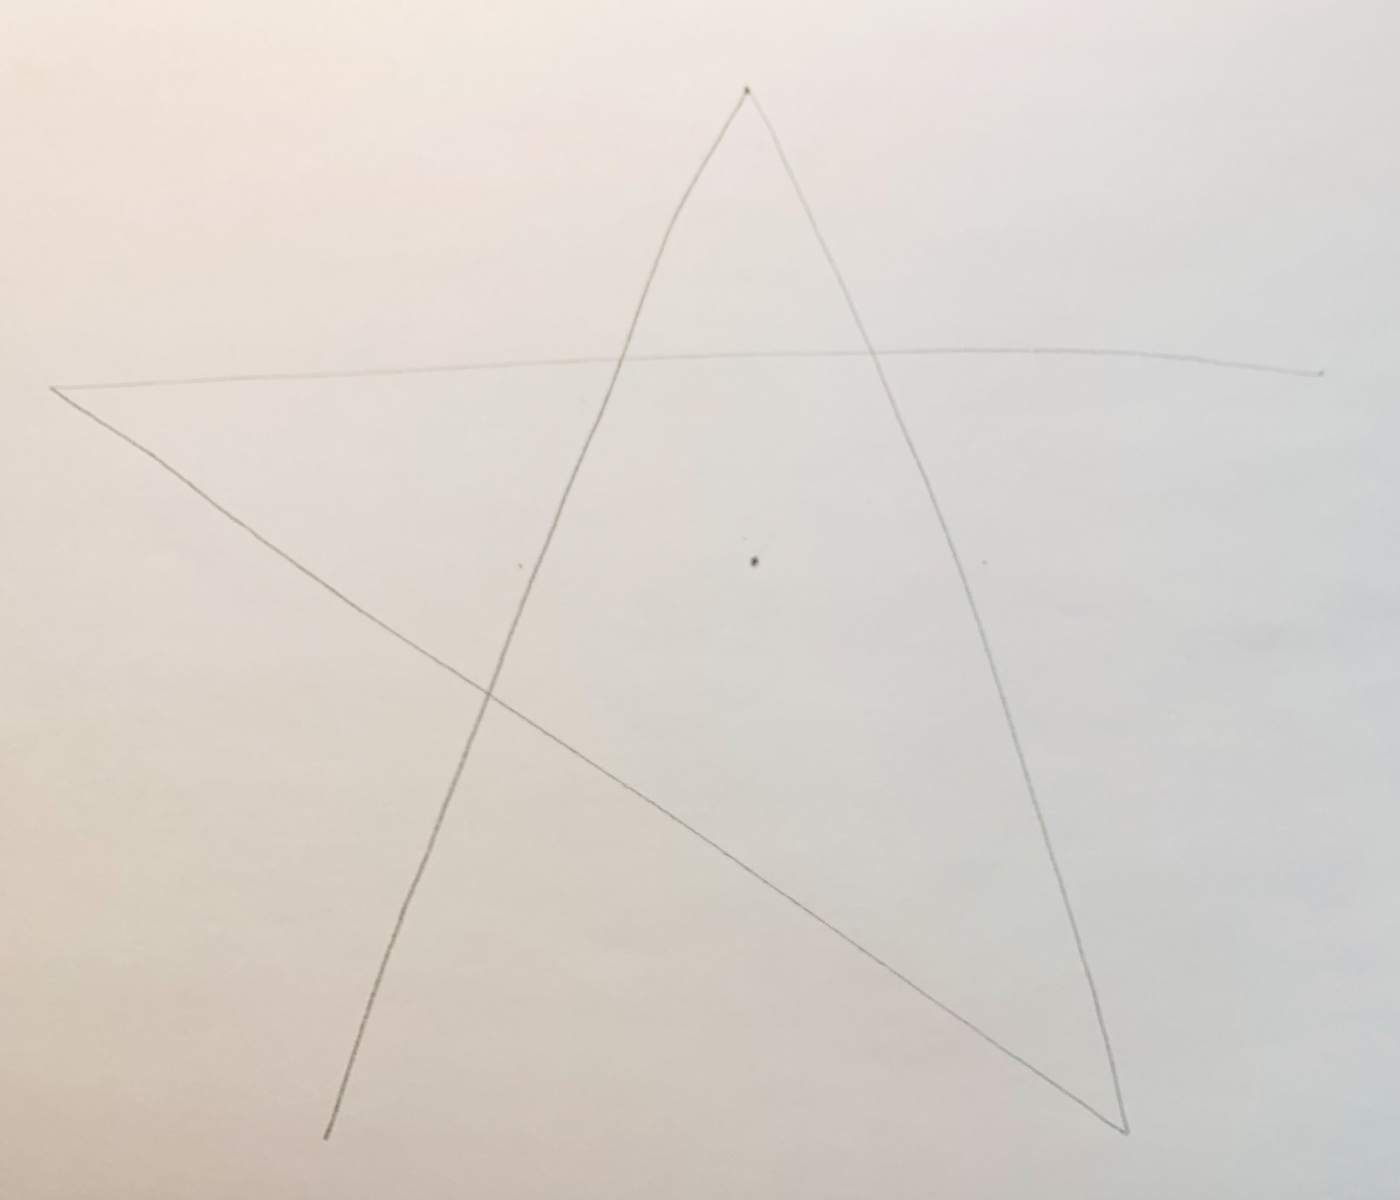 How to sketch a star